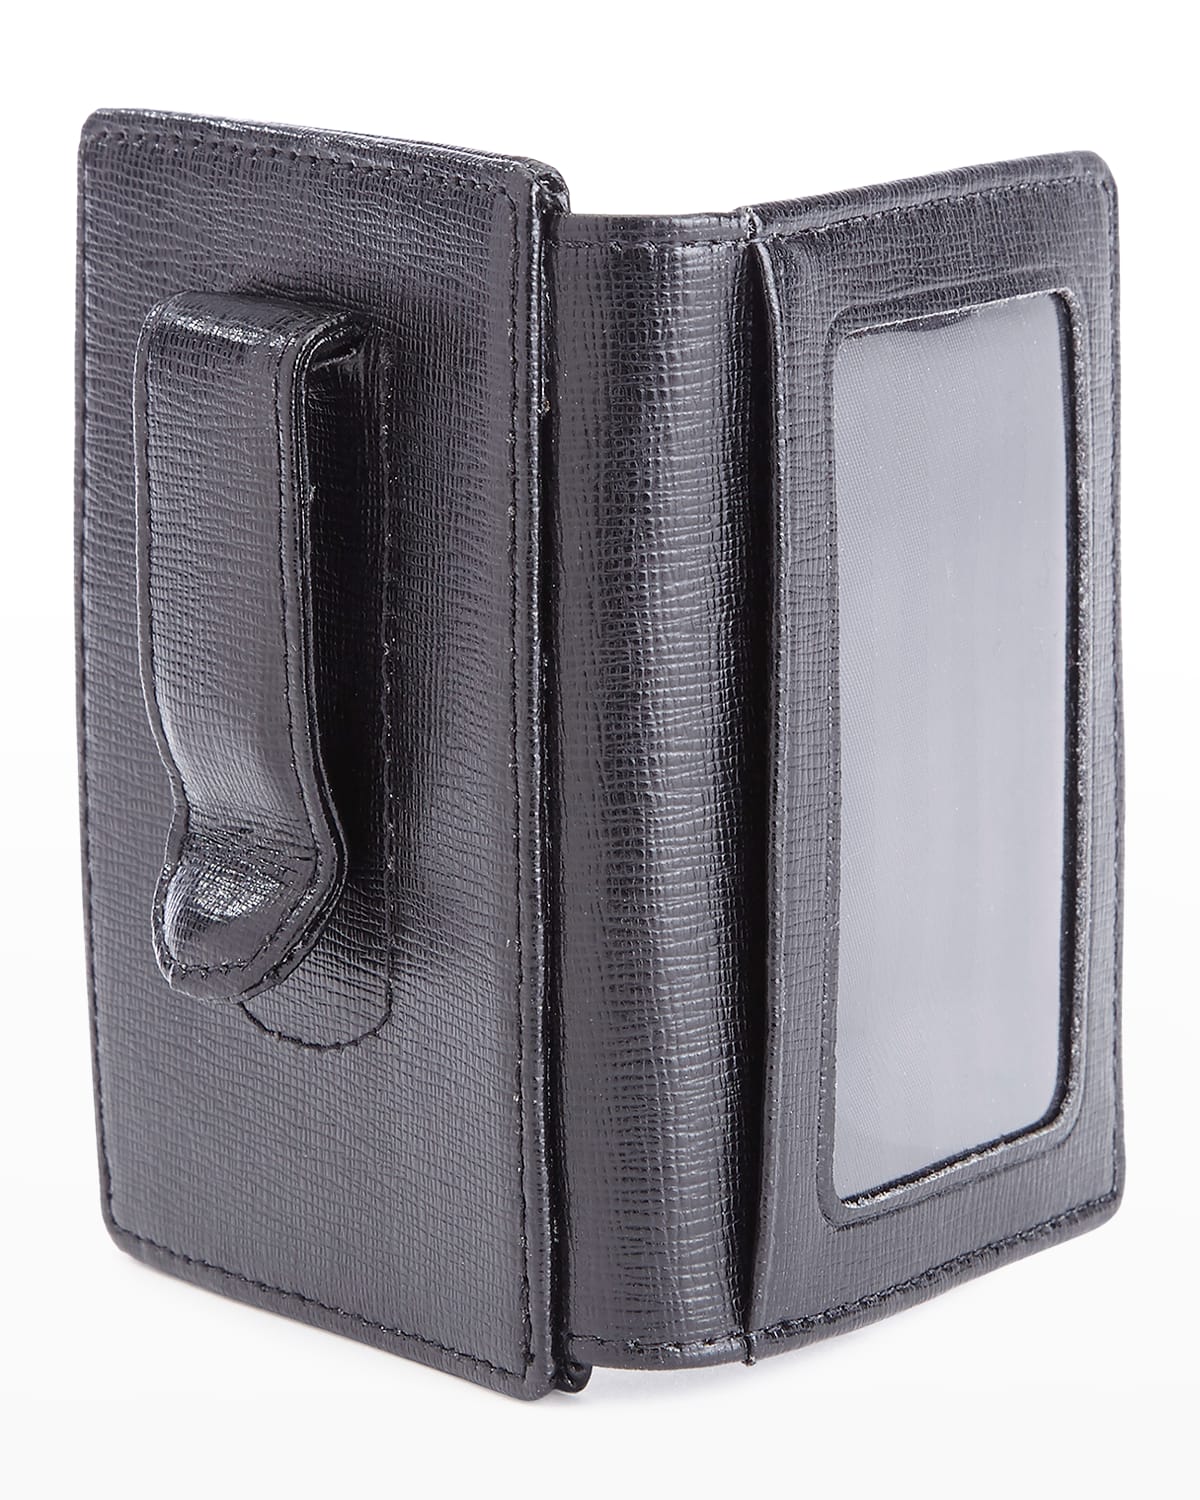 Personalized Leather Money Clip Wallet